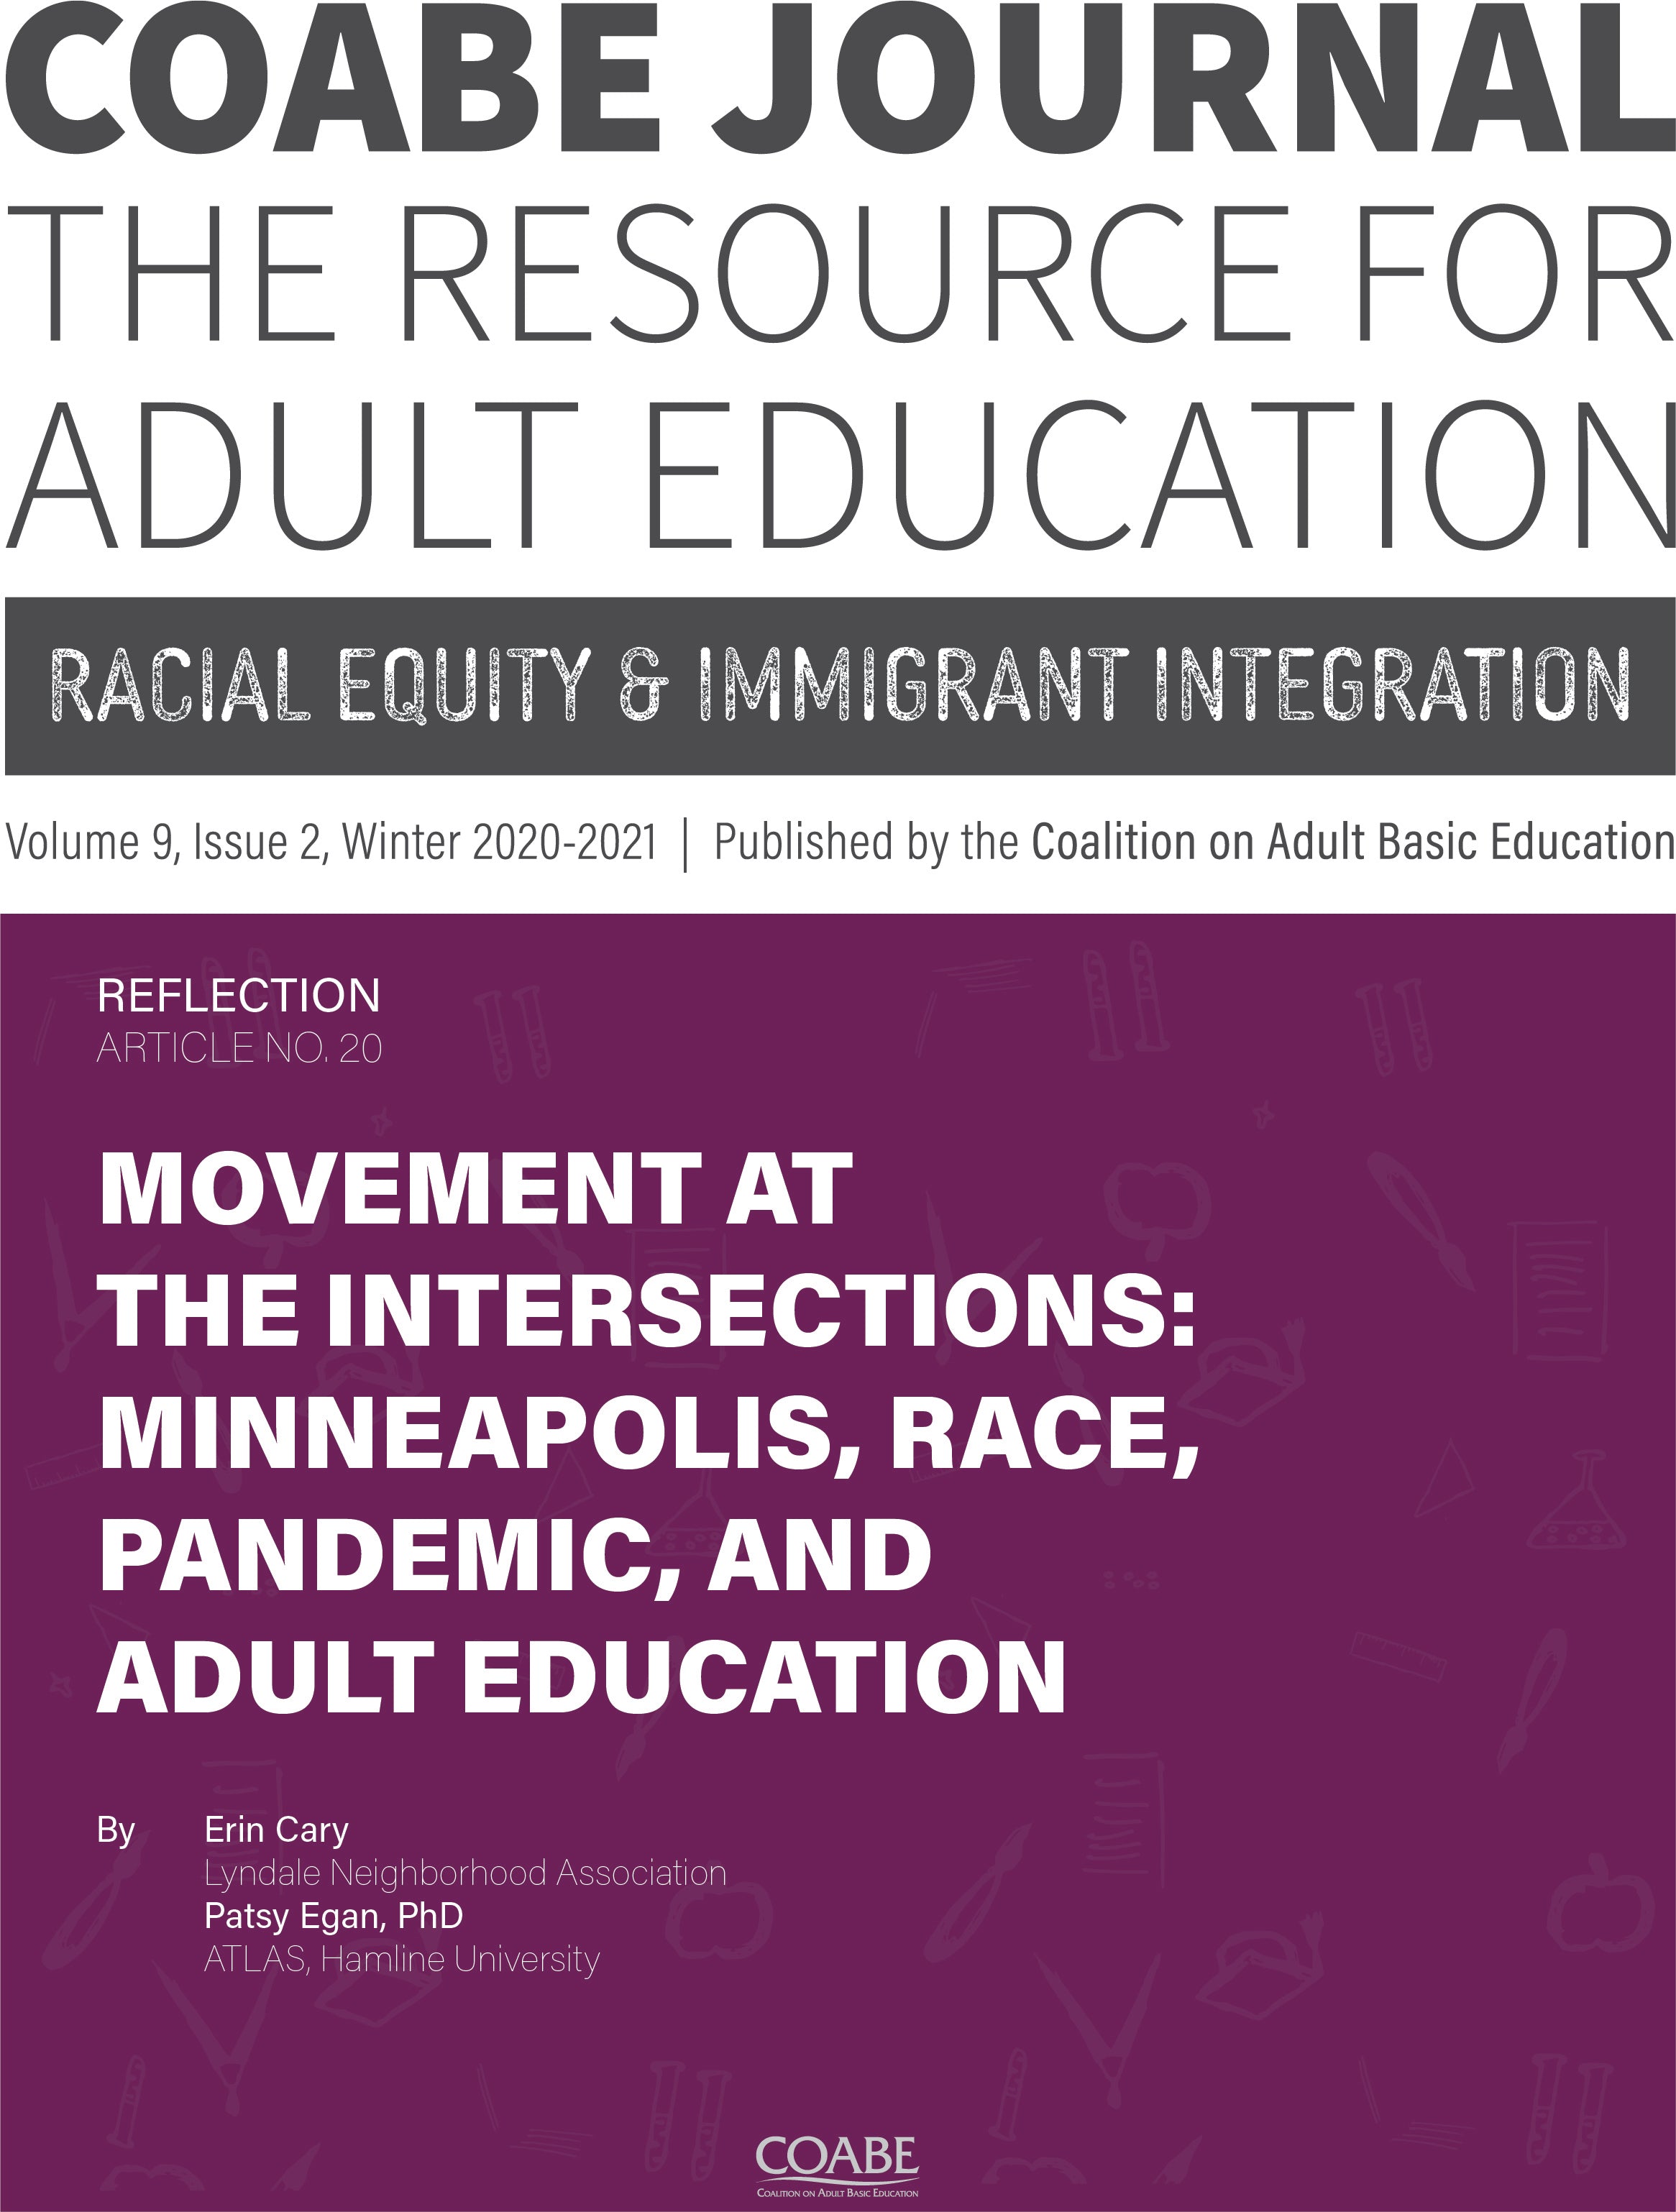 Article 20 / Movement at the Intersections: Minneapolis, Race, Pandemic, and Adult Education